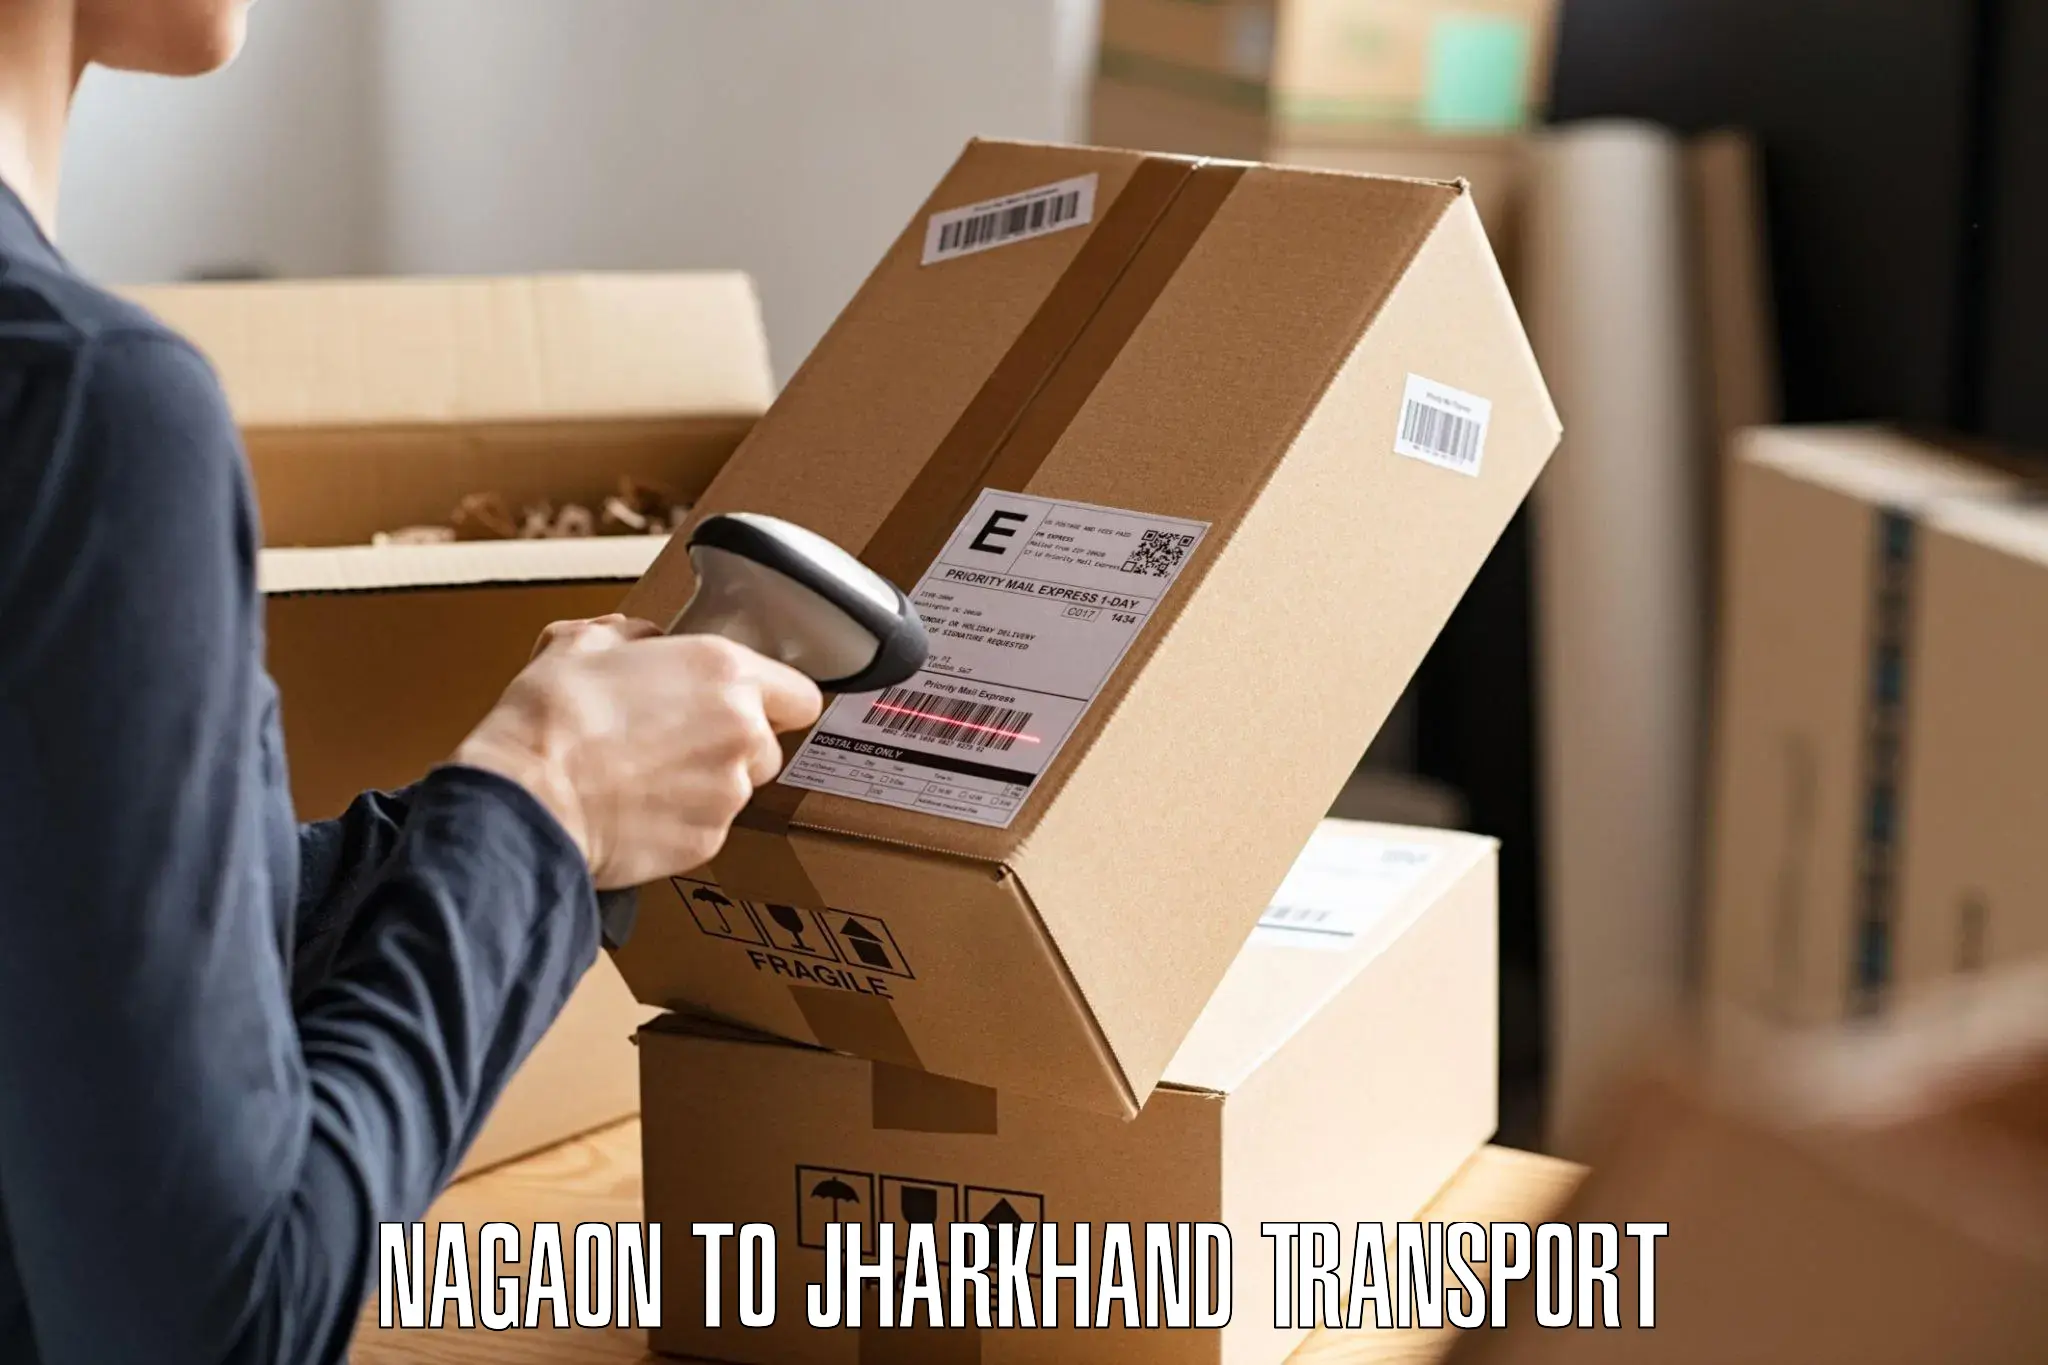 Road transport online services Nagaon to Dhanbad